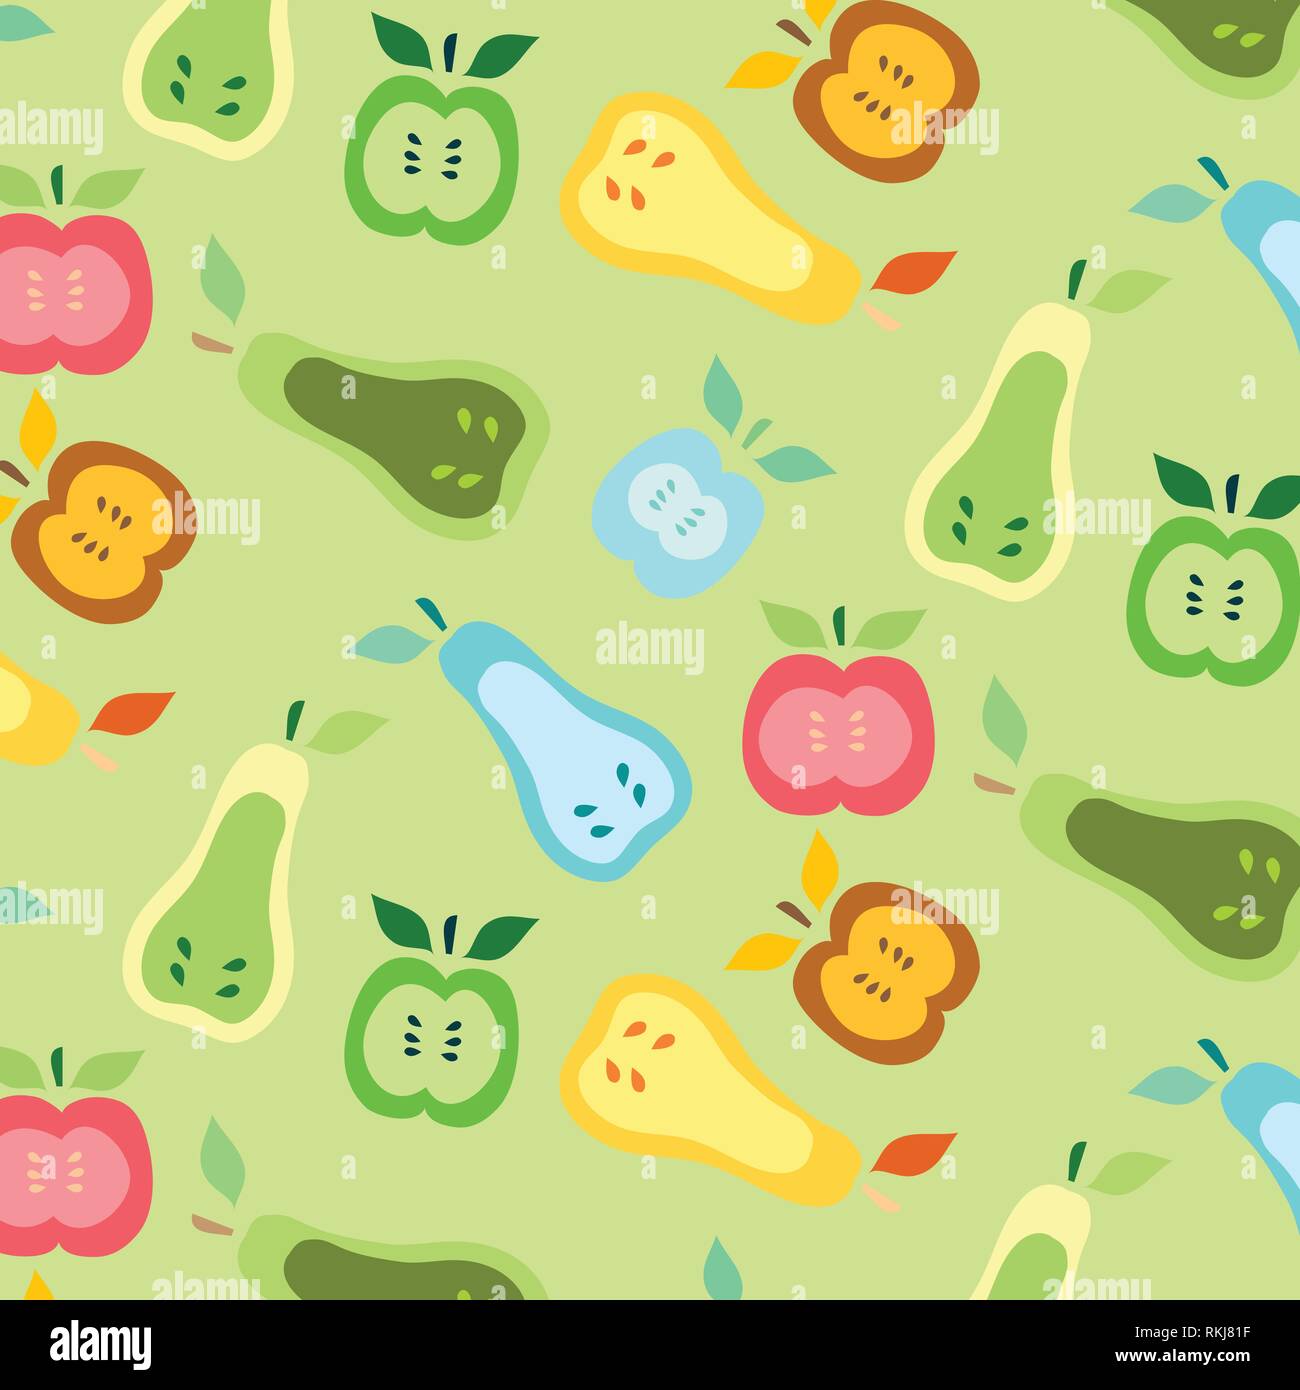 Pears and apples vector pattern illustration green, red, orange, blue and yellow colors on a light green background Stock Vector